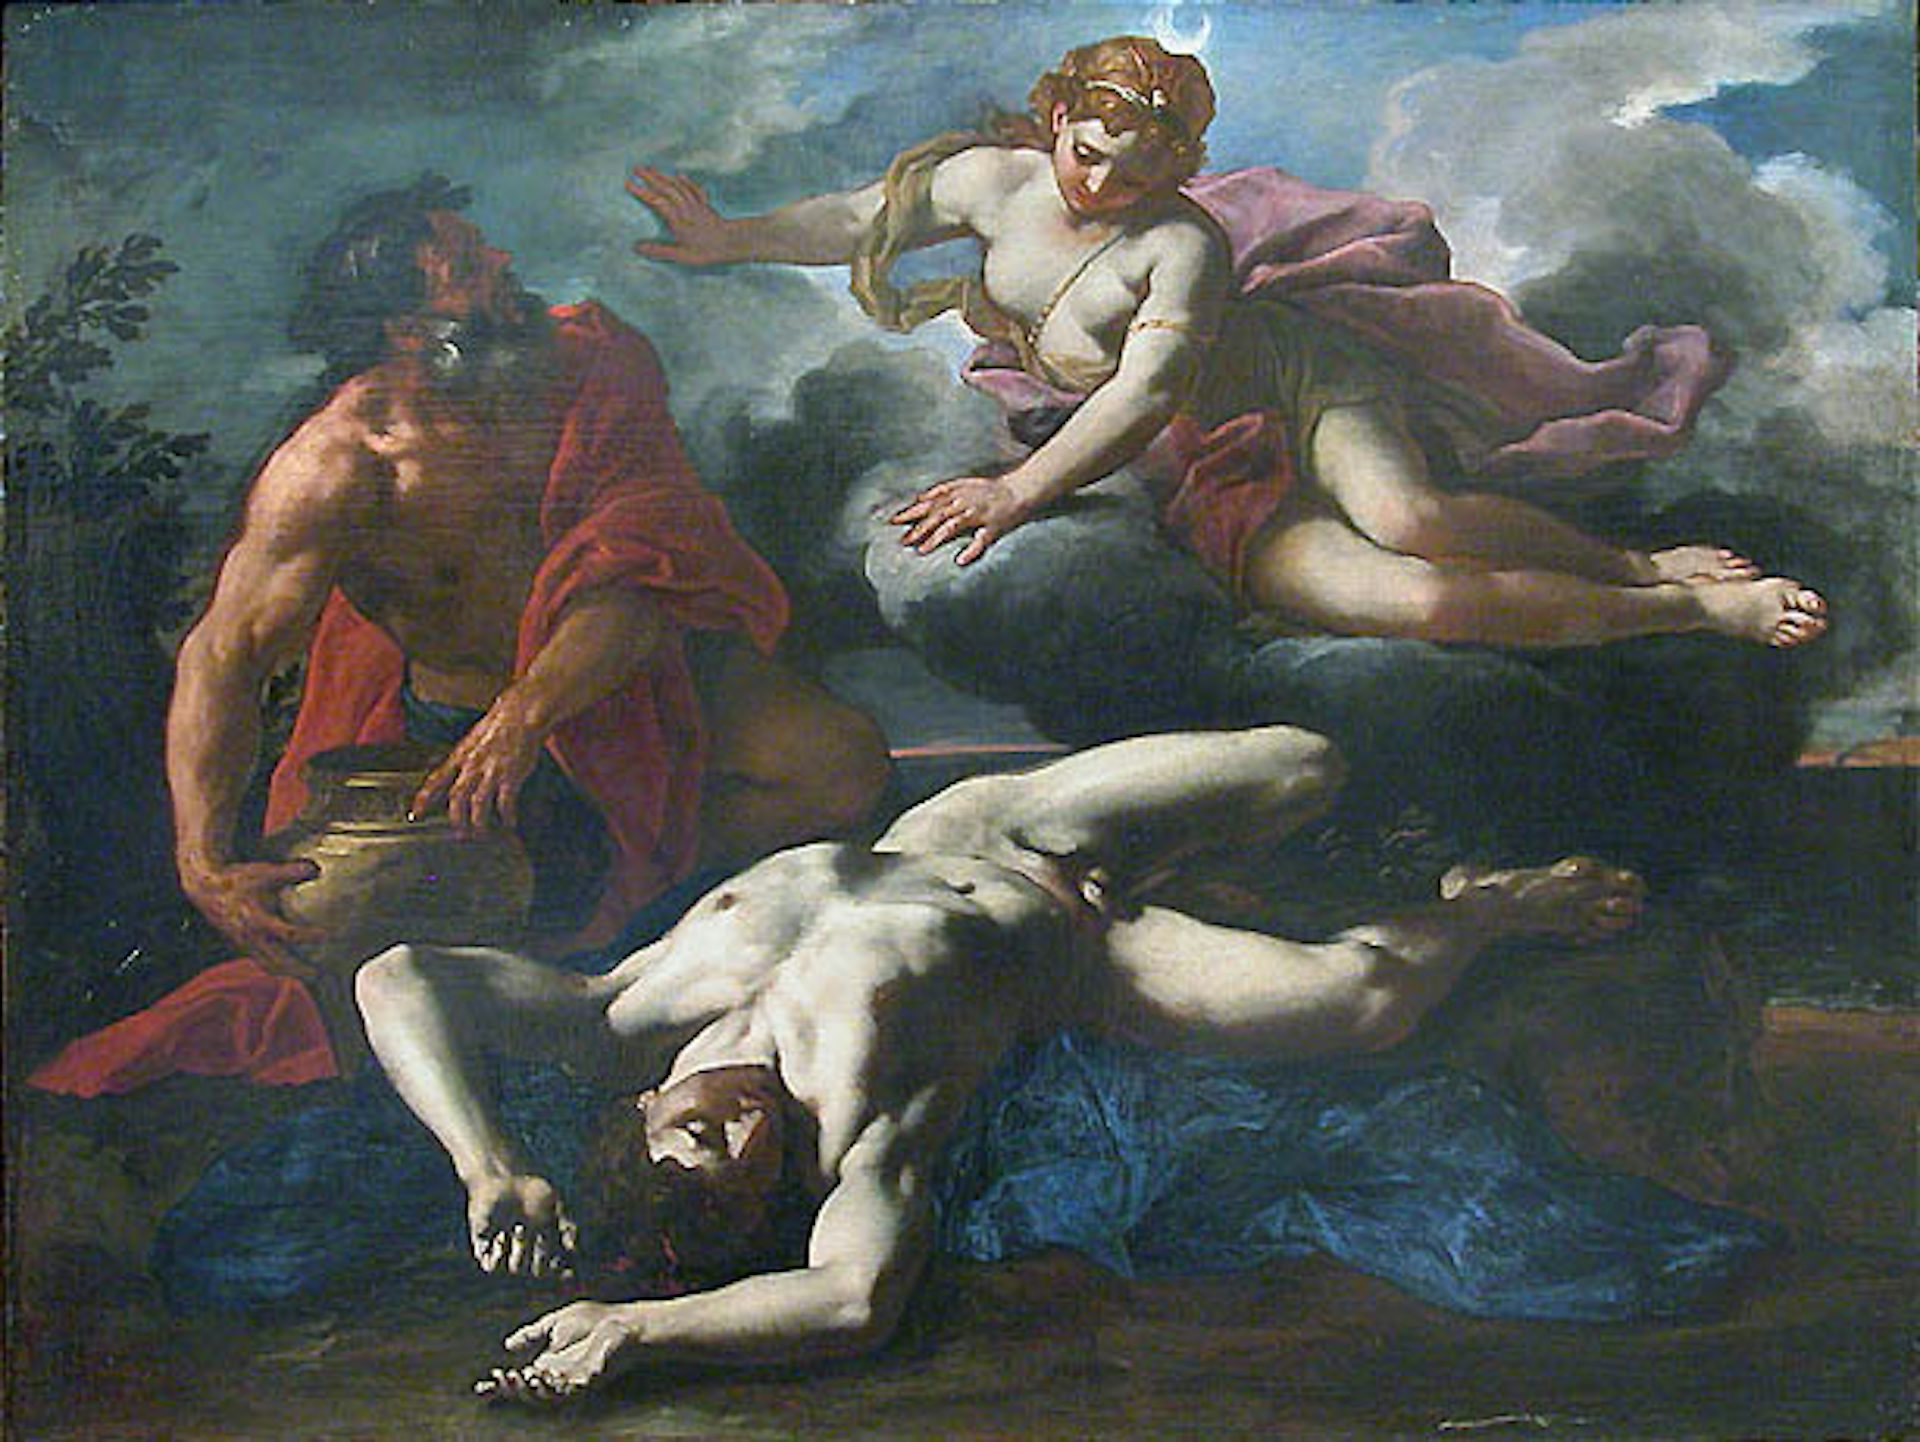 Diana Over Orion’s Corpse by Daniel Seiter